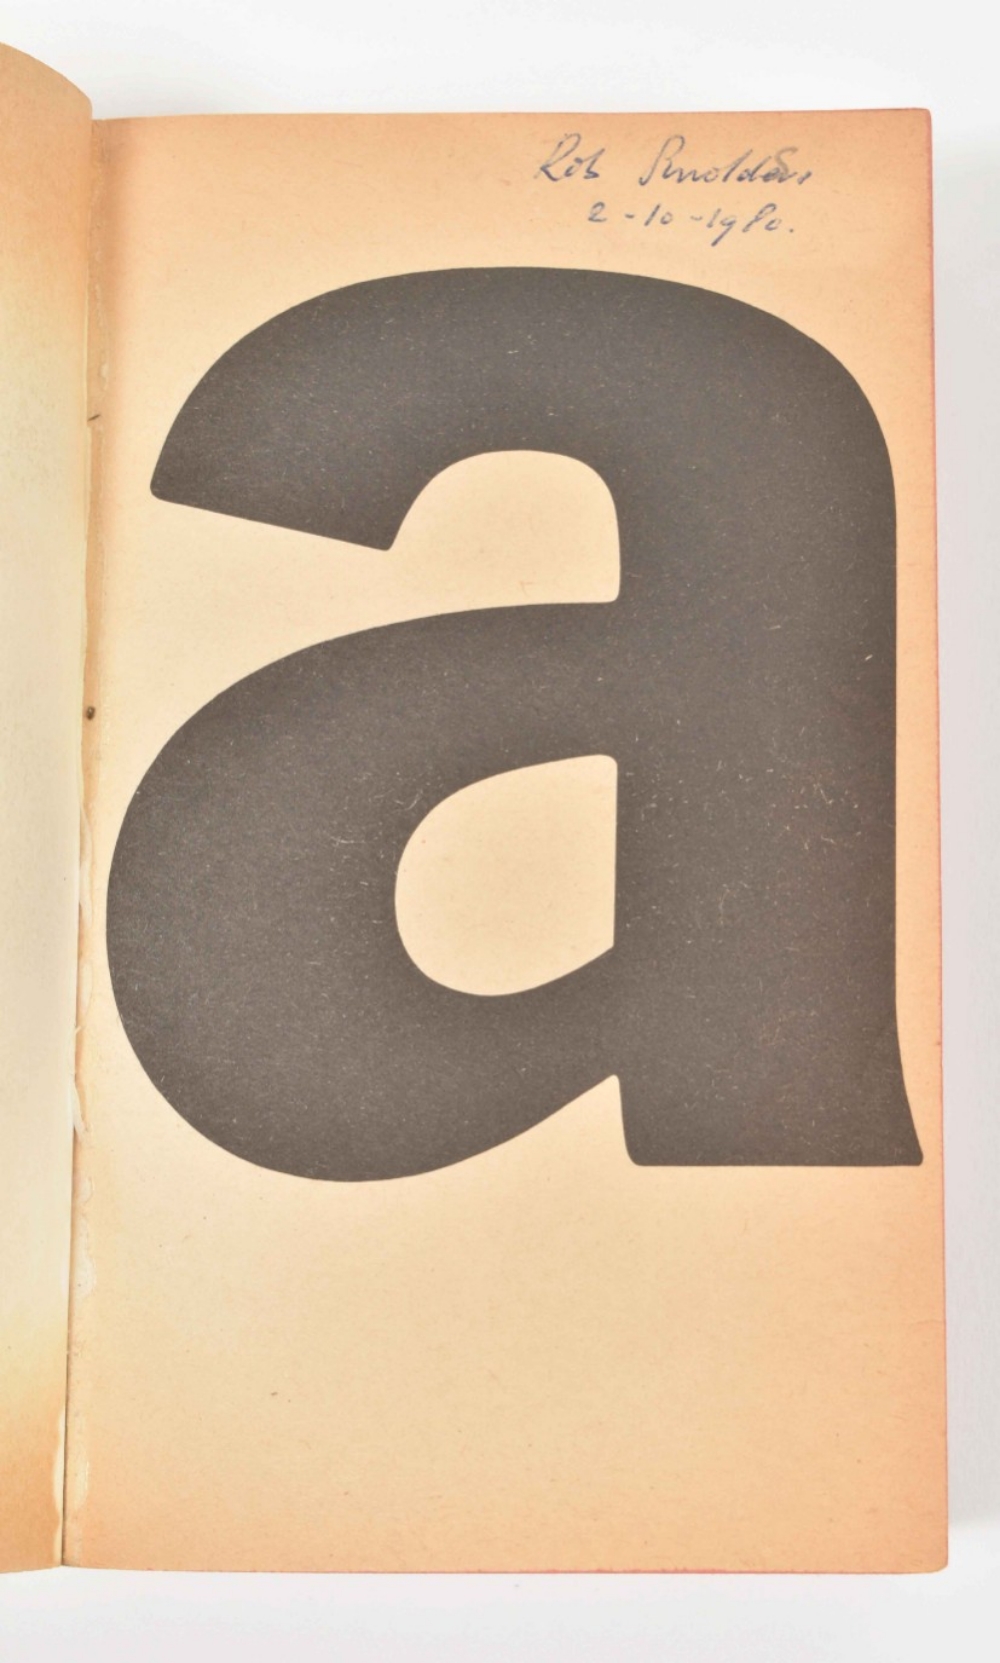 A by Andy Warhol, 1968  - Image 4 of 5